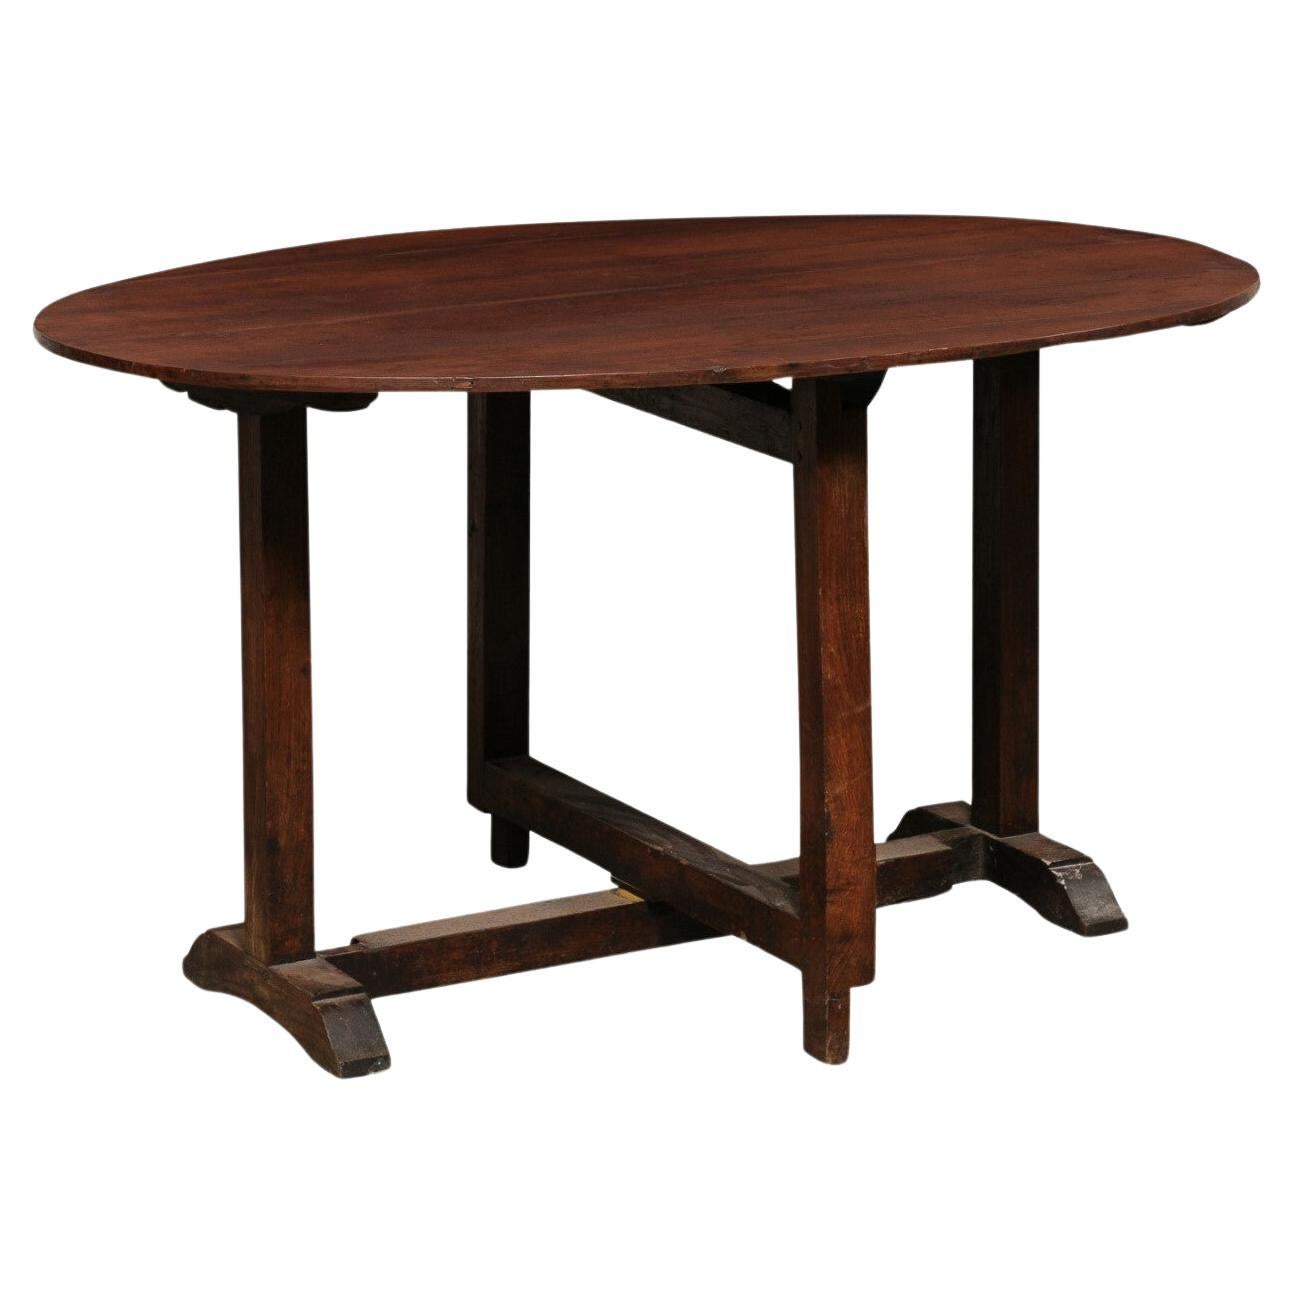 Antique French Vintner's Table, Oval-Shaped